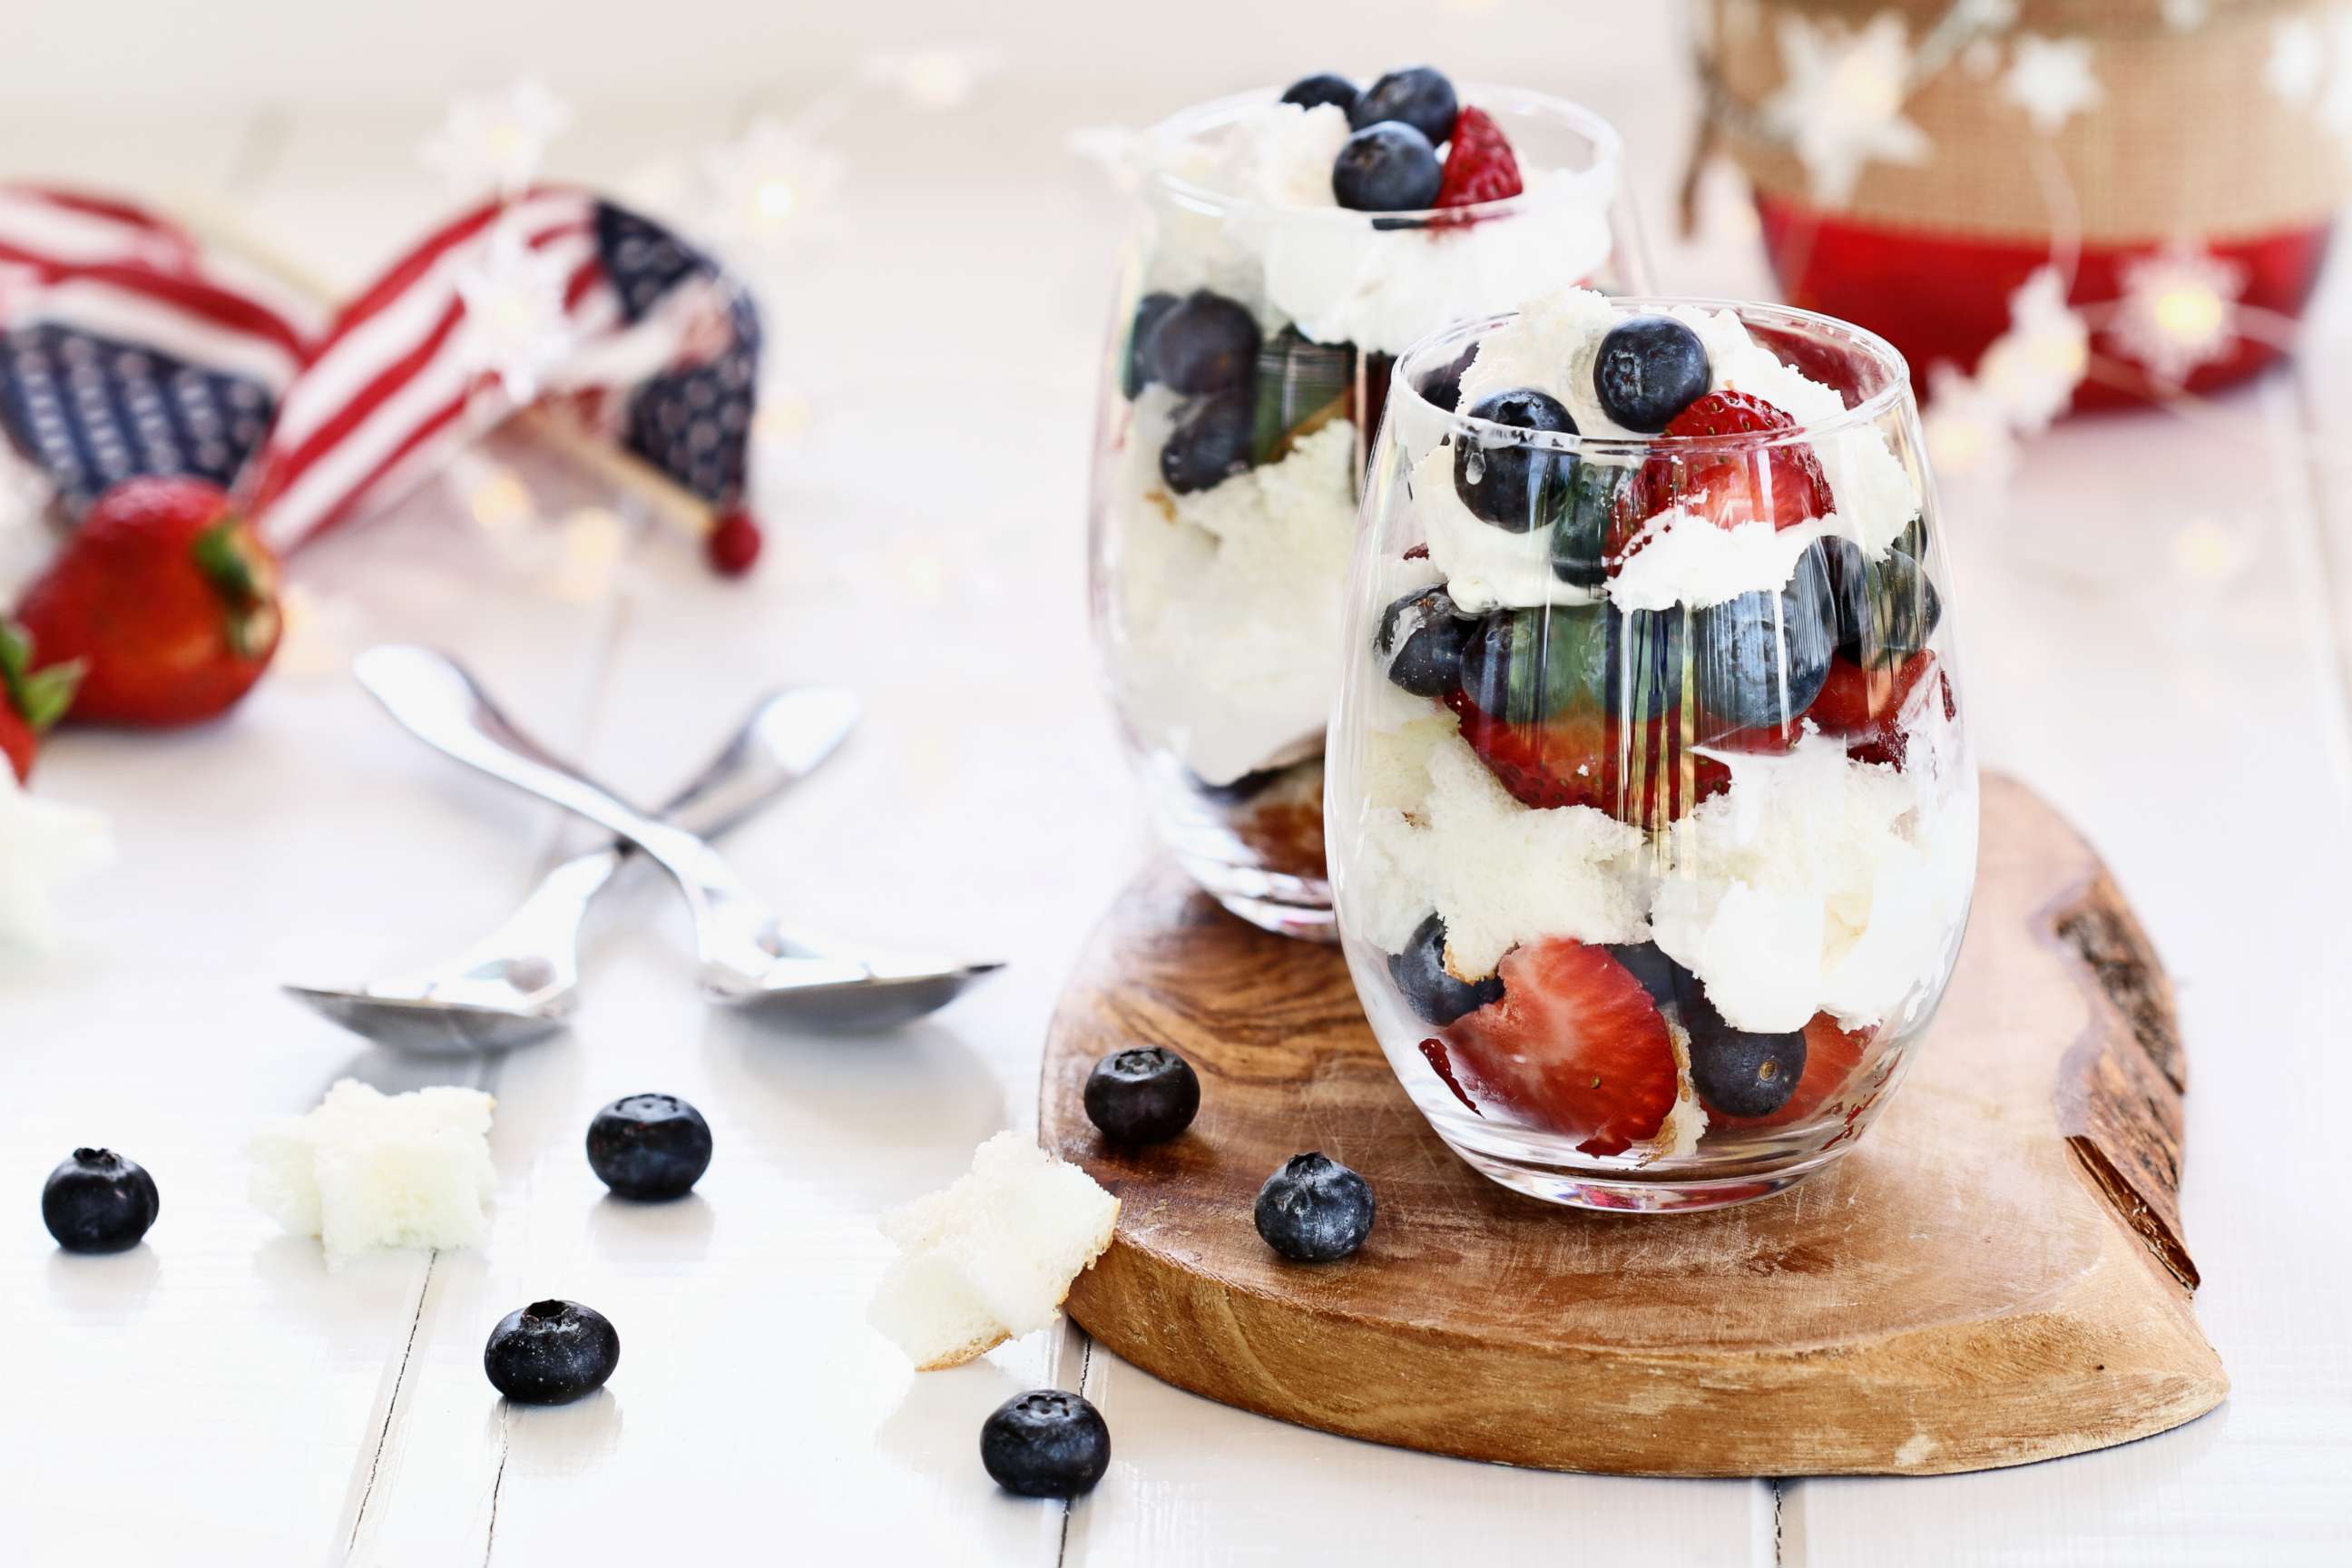 PHOTO: Trifle made with blueberries, strawberries, whipped cream and star shaped pound cake.